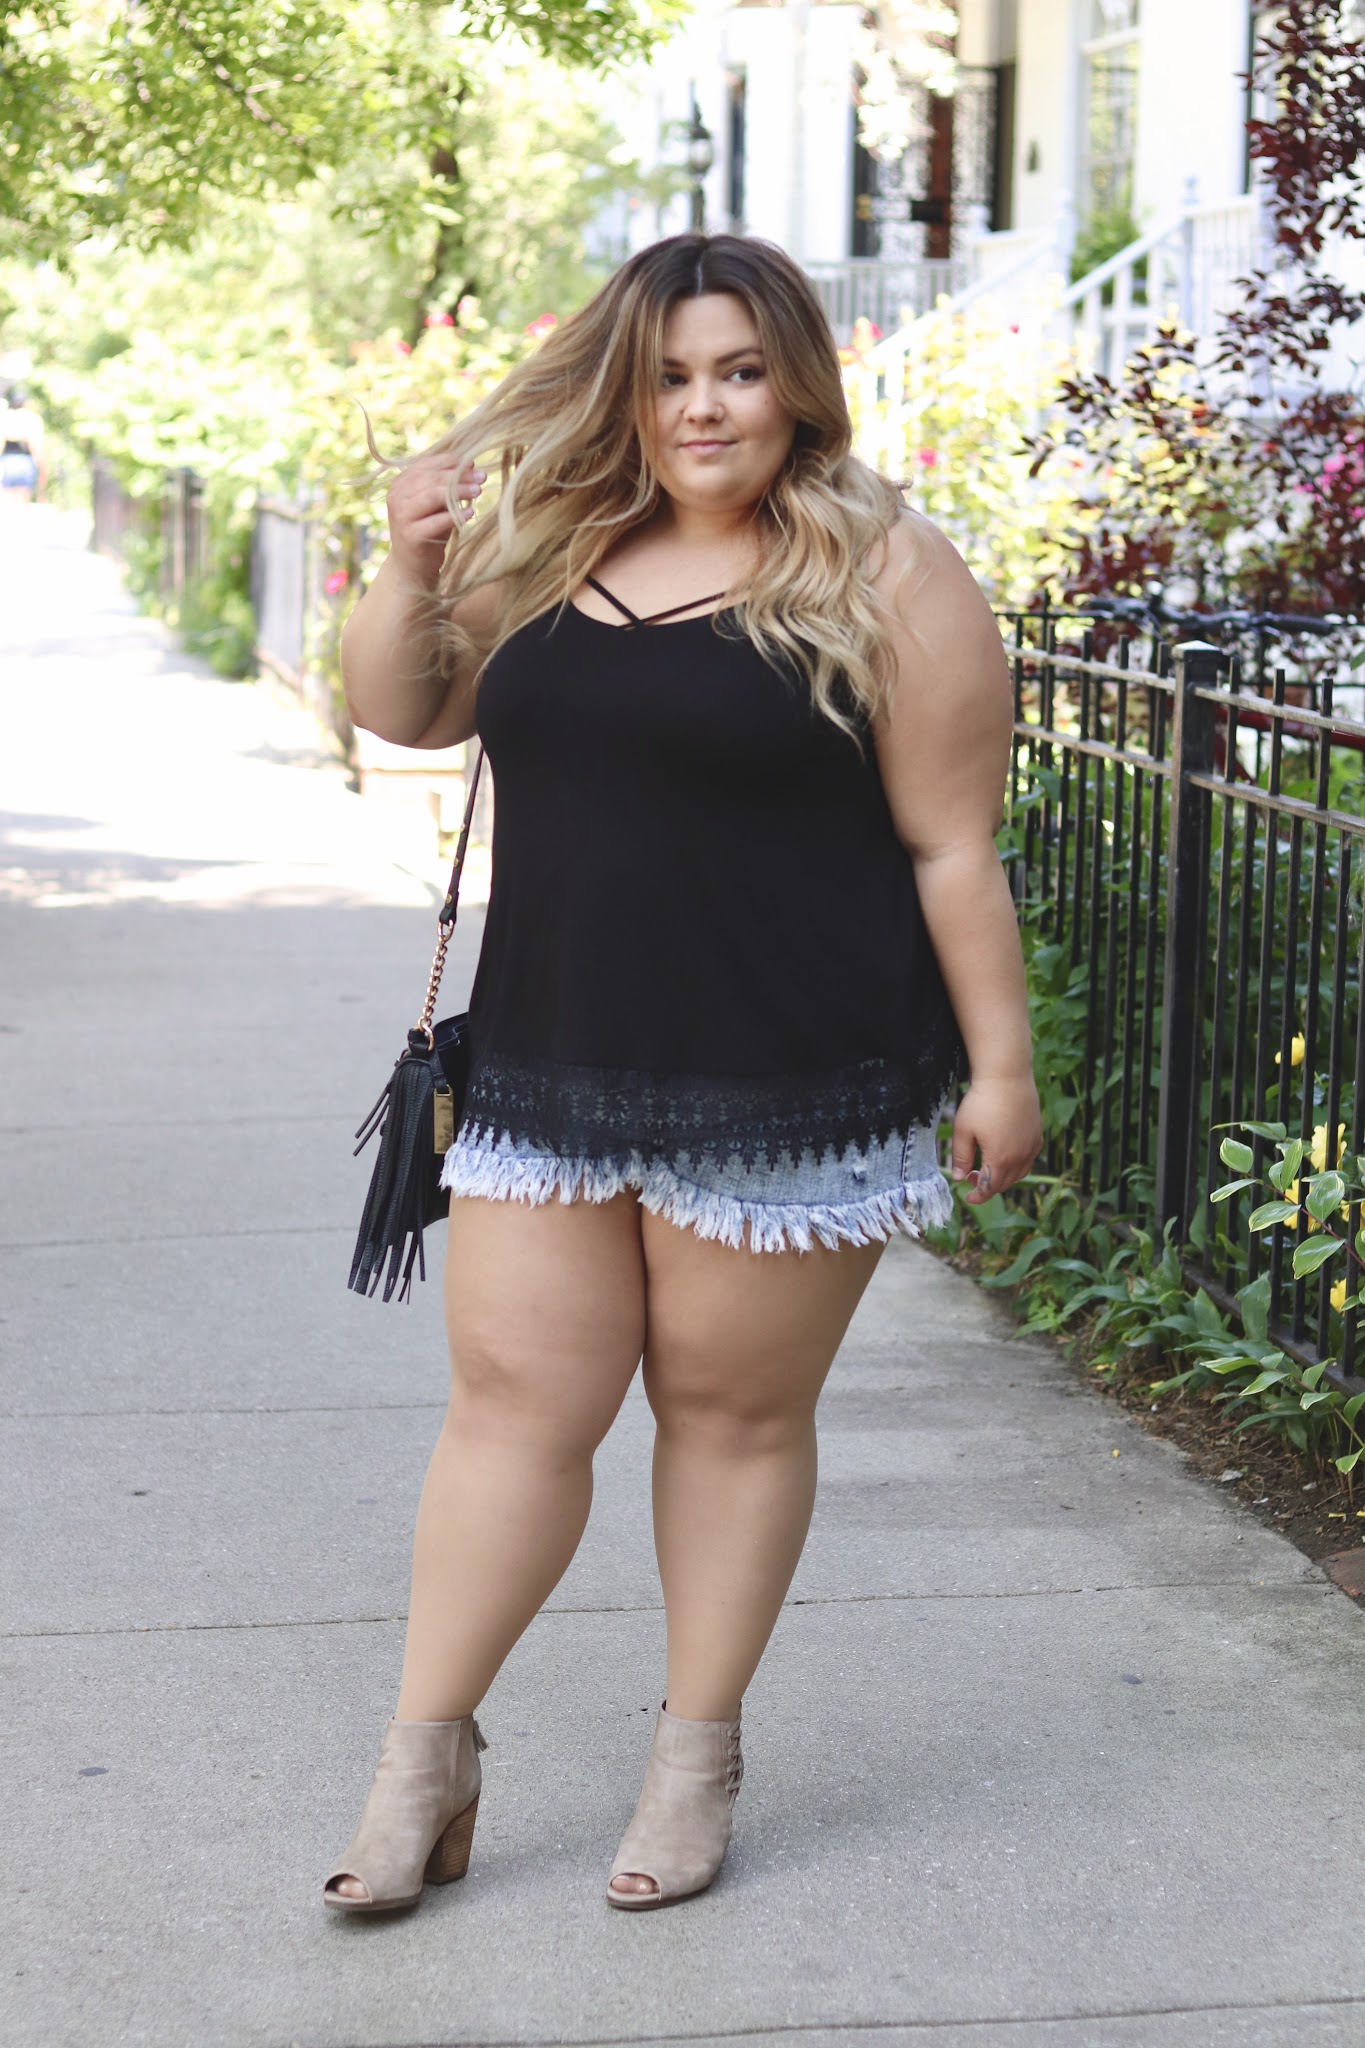 Natalie in the City shares here favorite chub rub help and tips from plus size opaque tights to anti-chafe shorts and balms.